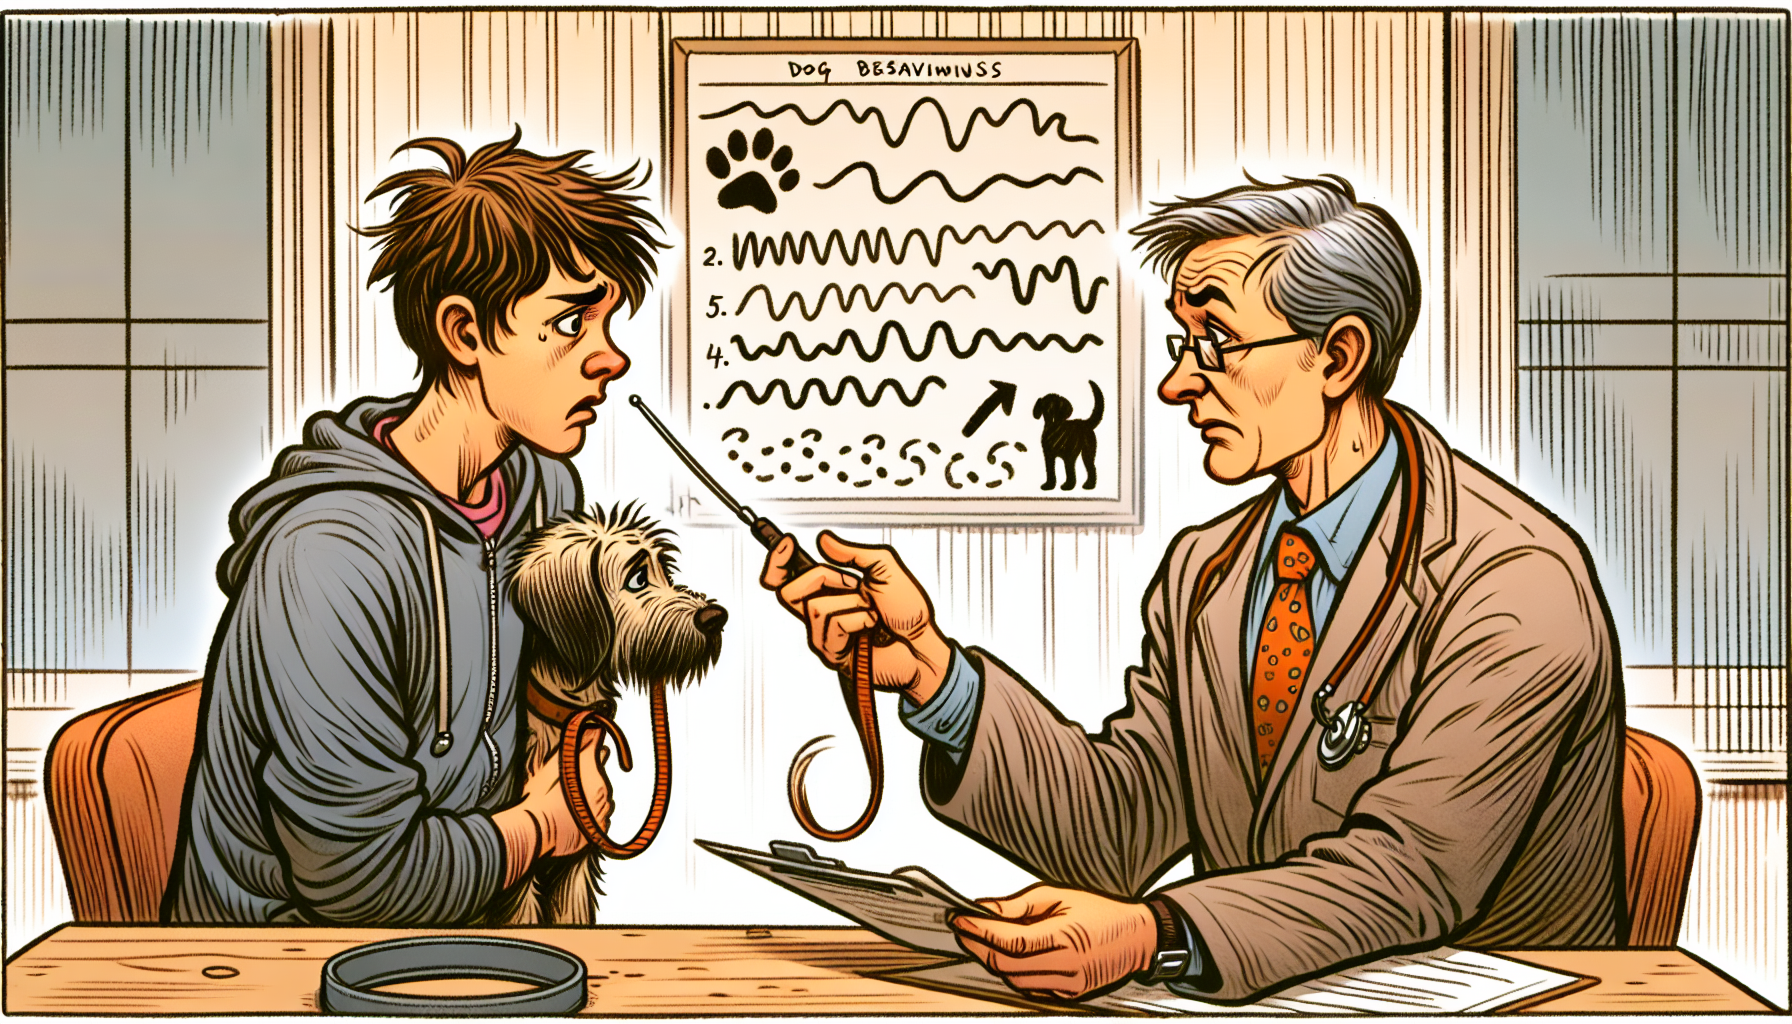 Illustration of a concerned owner consulting a veterinarian or trainer